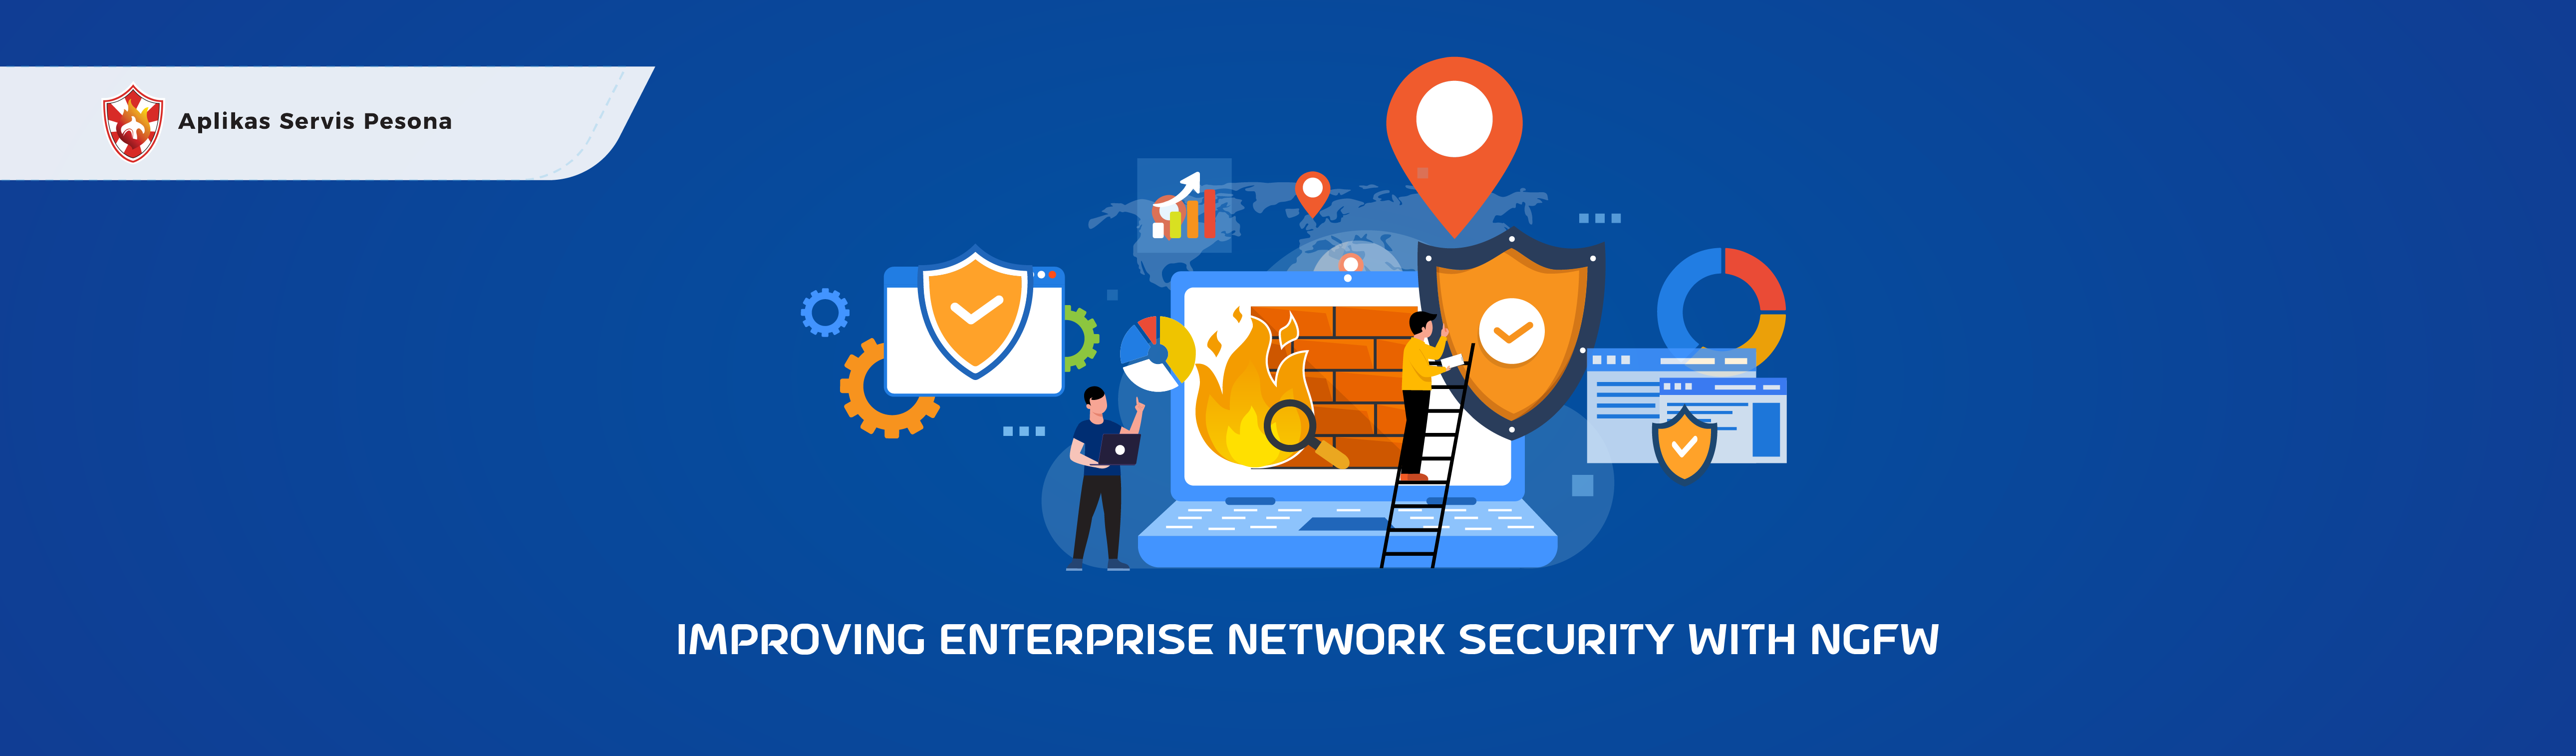 Improving Enterprise Network Security with NGFW Assistance